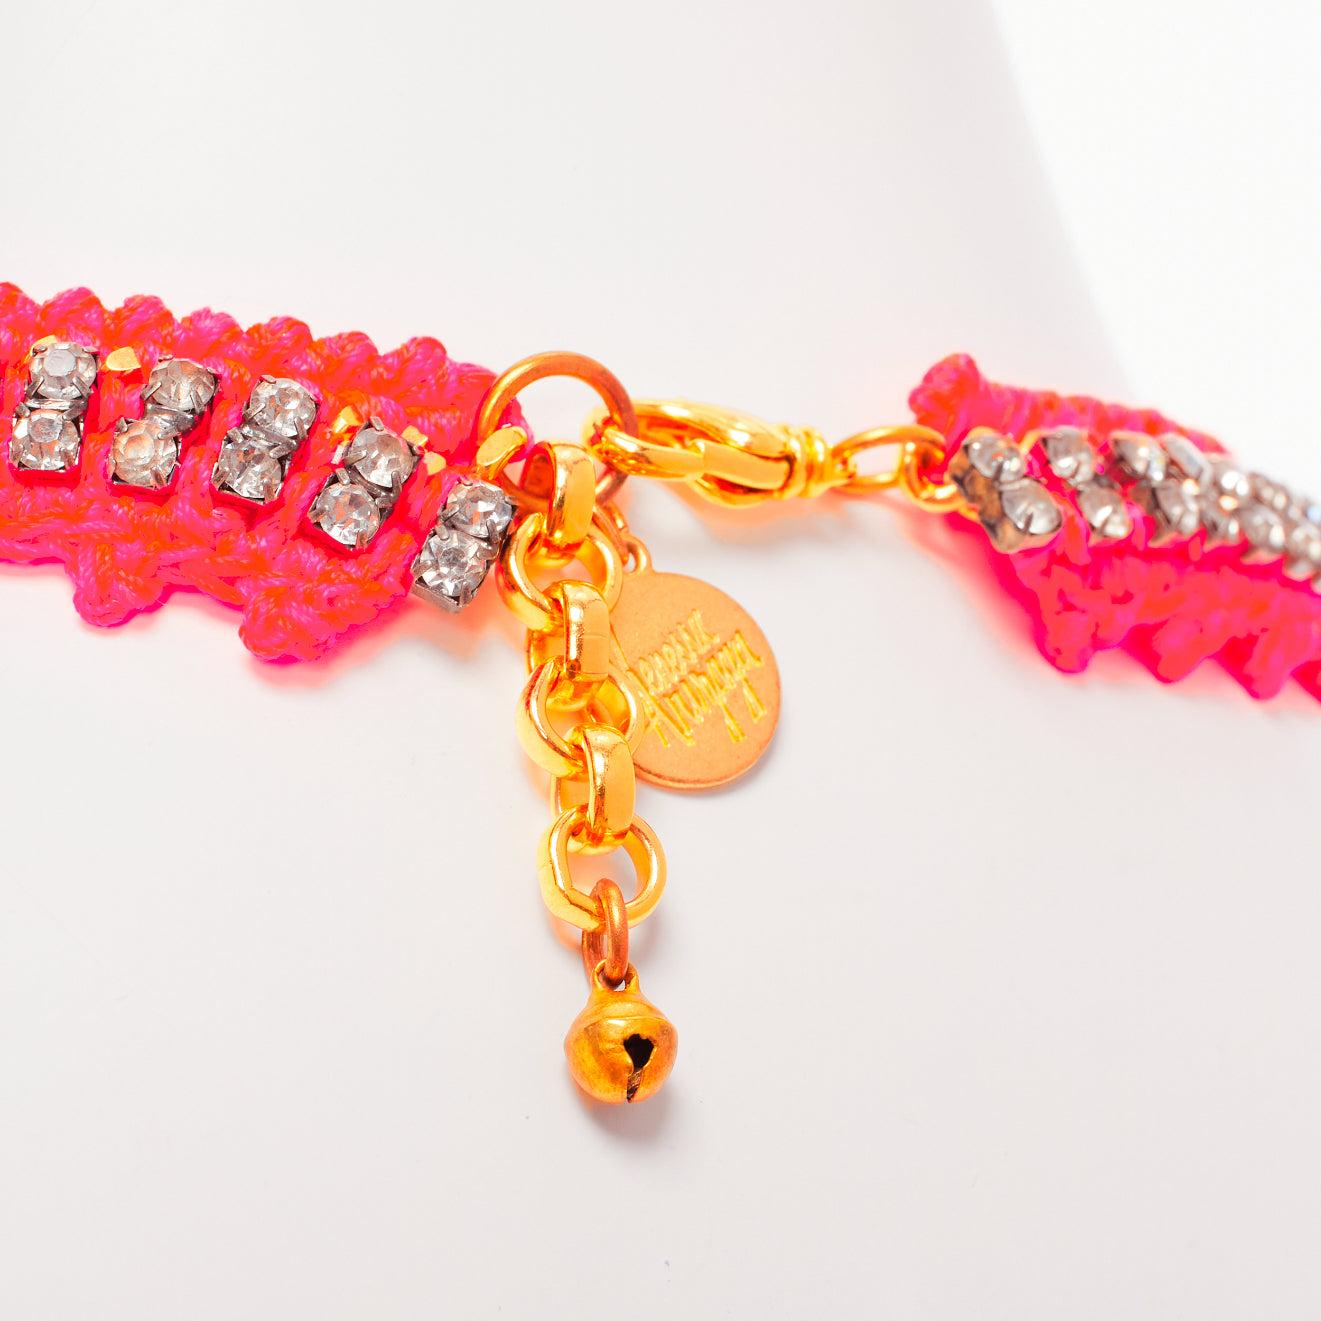 VANESSA ARIZAGA neon orange rope clear crystal chandelier short necklace
Reference: AAWC/A01044
Brand: Vanessa Arizaga
Material: Metal, Fabric
Color: Orange, Clear
Pattern: Crystals
Closure: Lobster Clasp
Lining: Orange Fabric

CONDITION:
Condition: